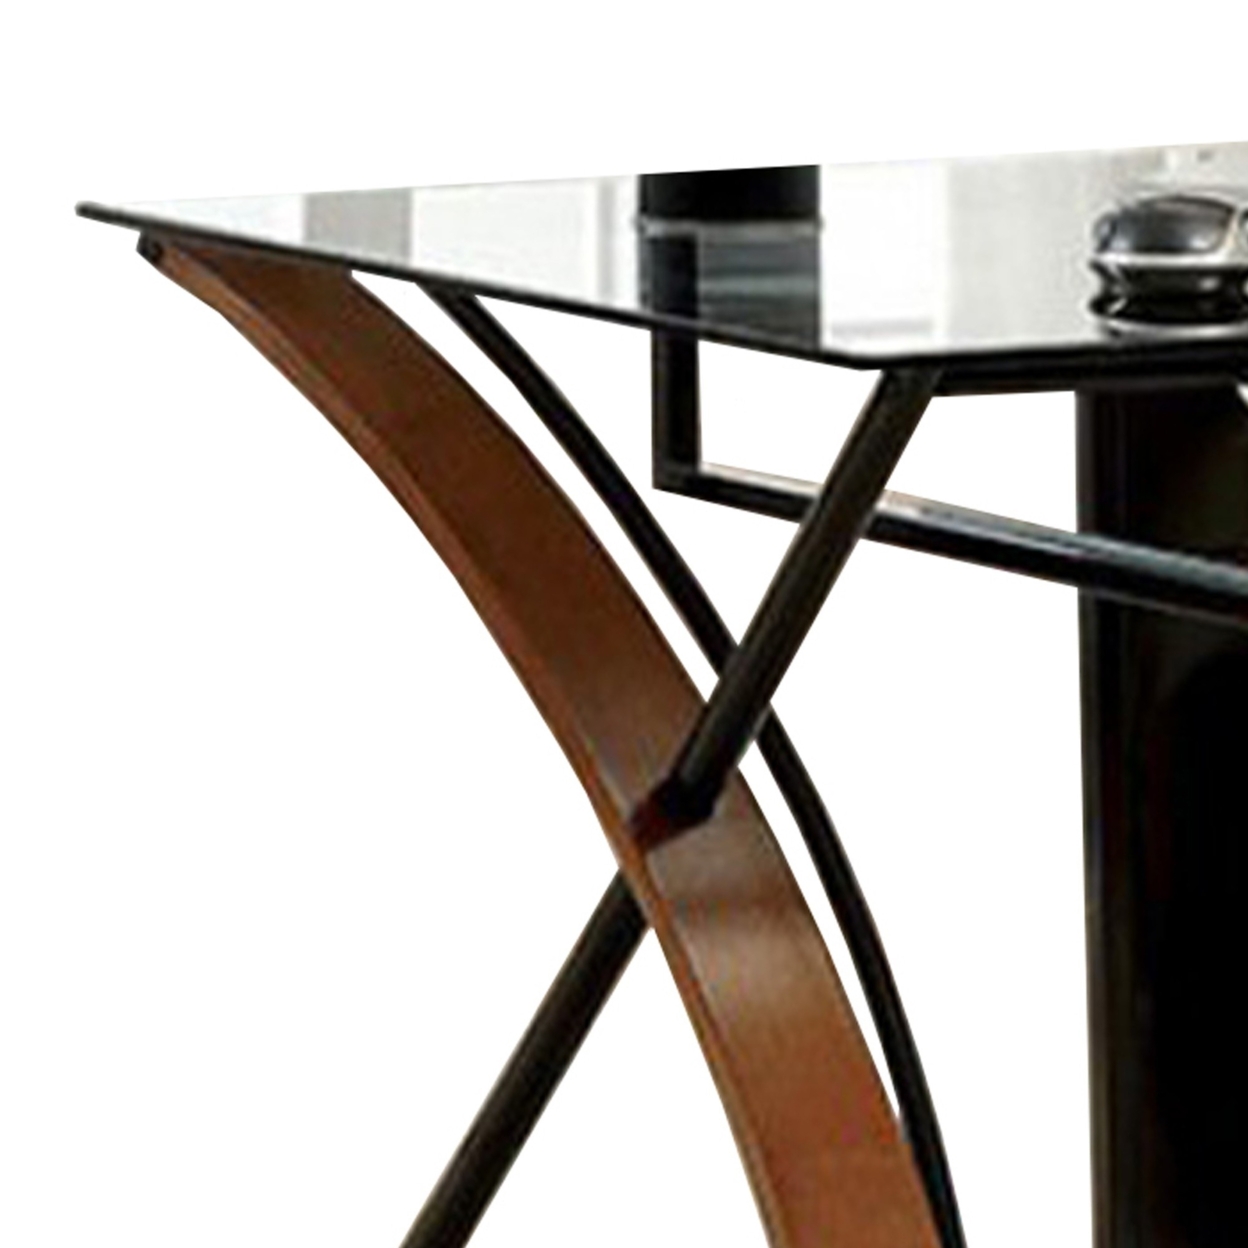 Glass Top Computer Desk With Z Shaped Metal Legs, Brown And Black - Saltoro Sherpi